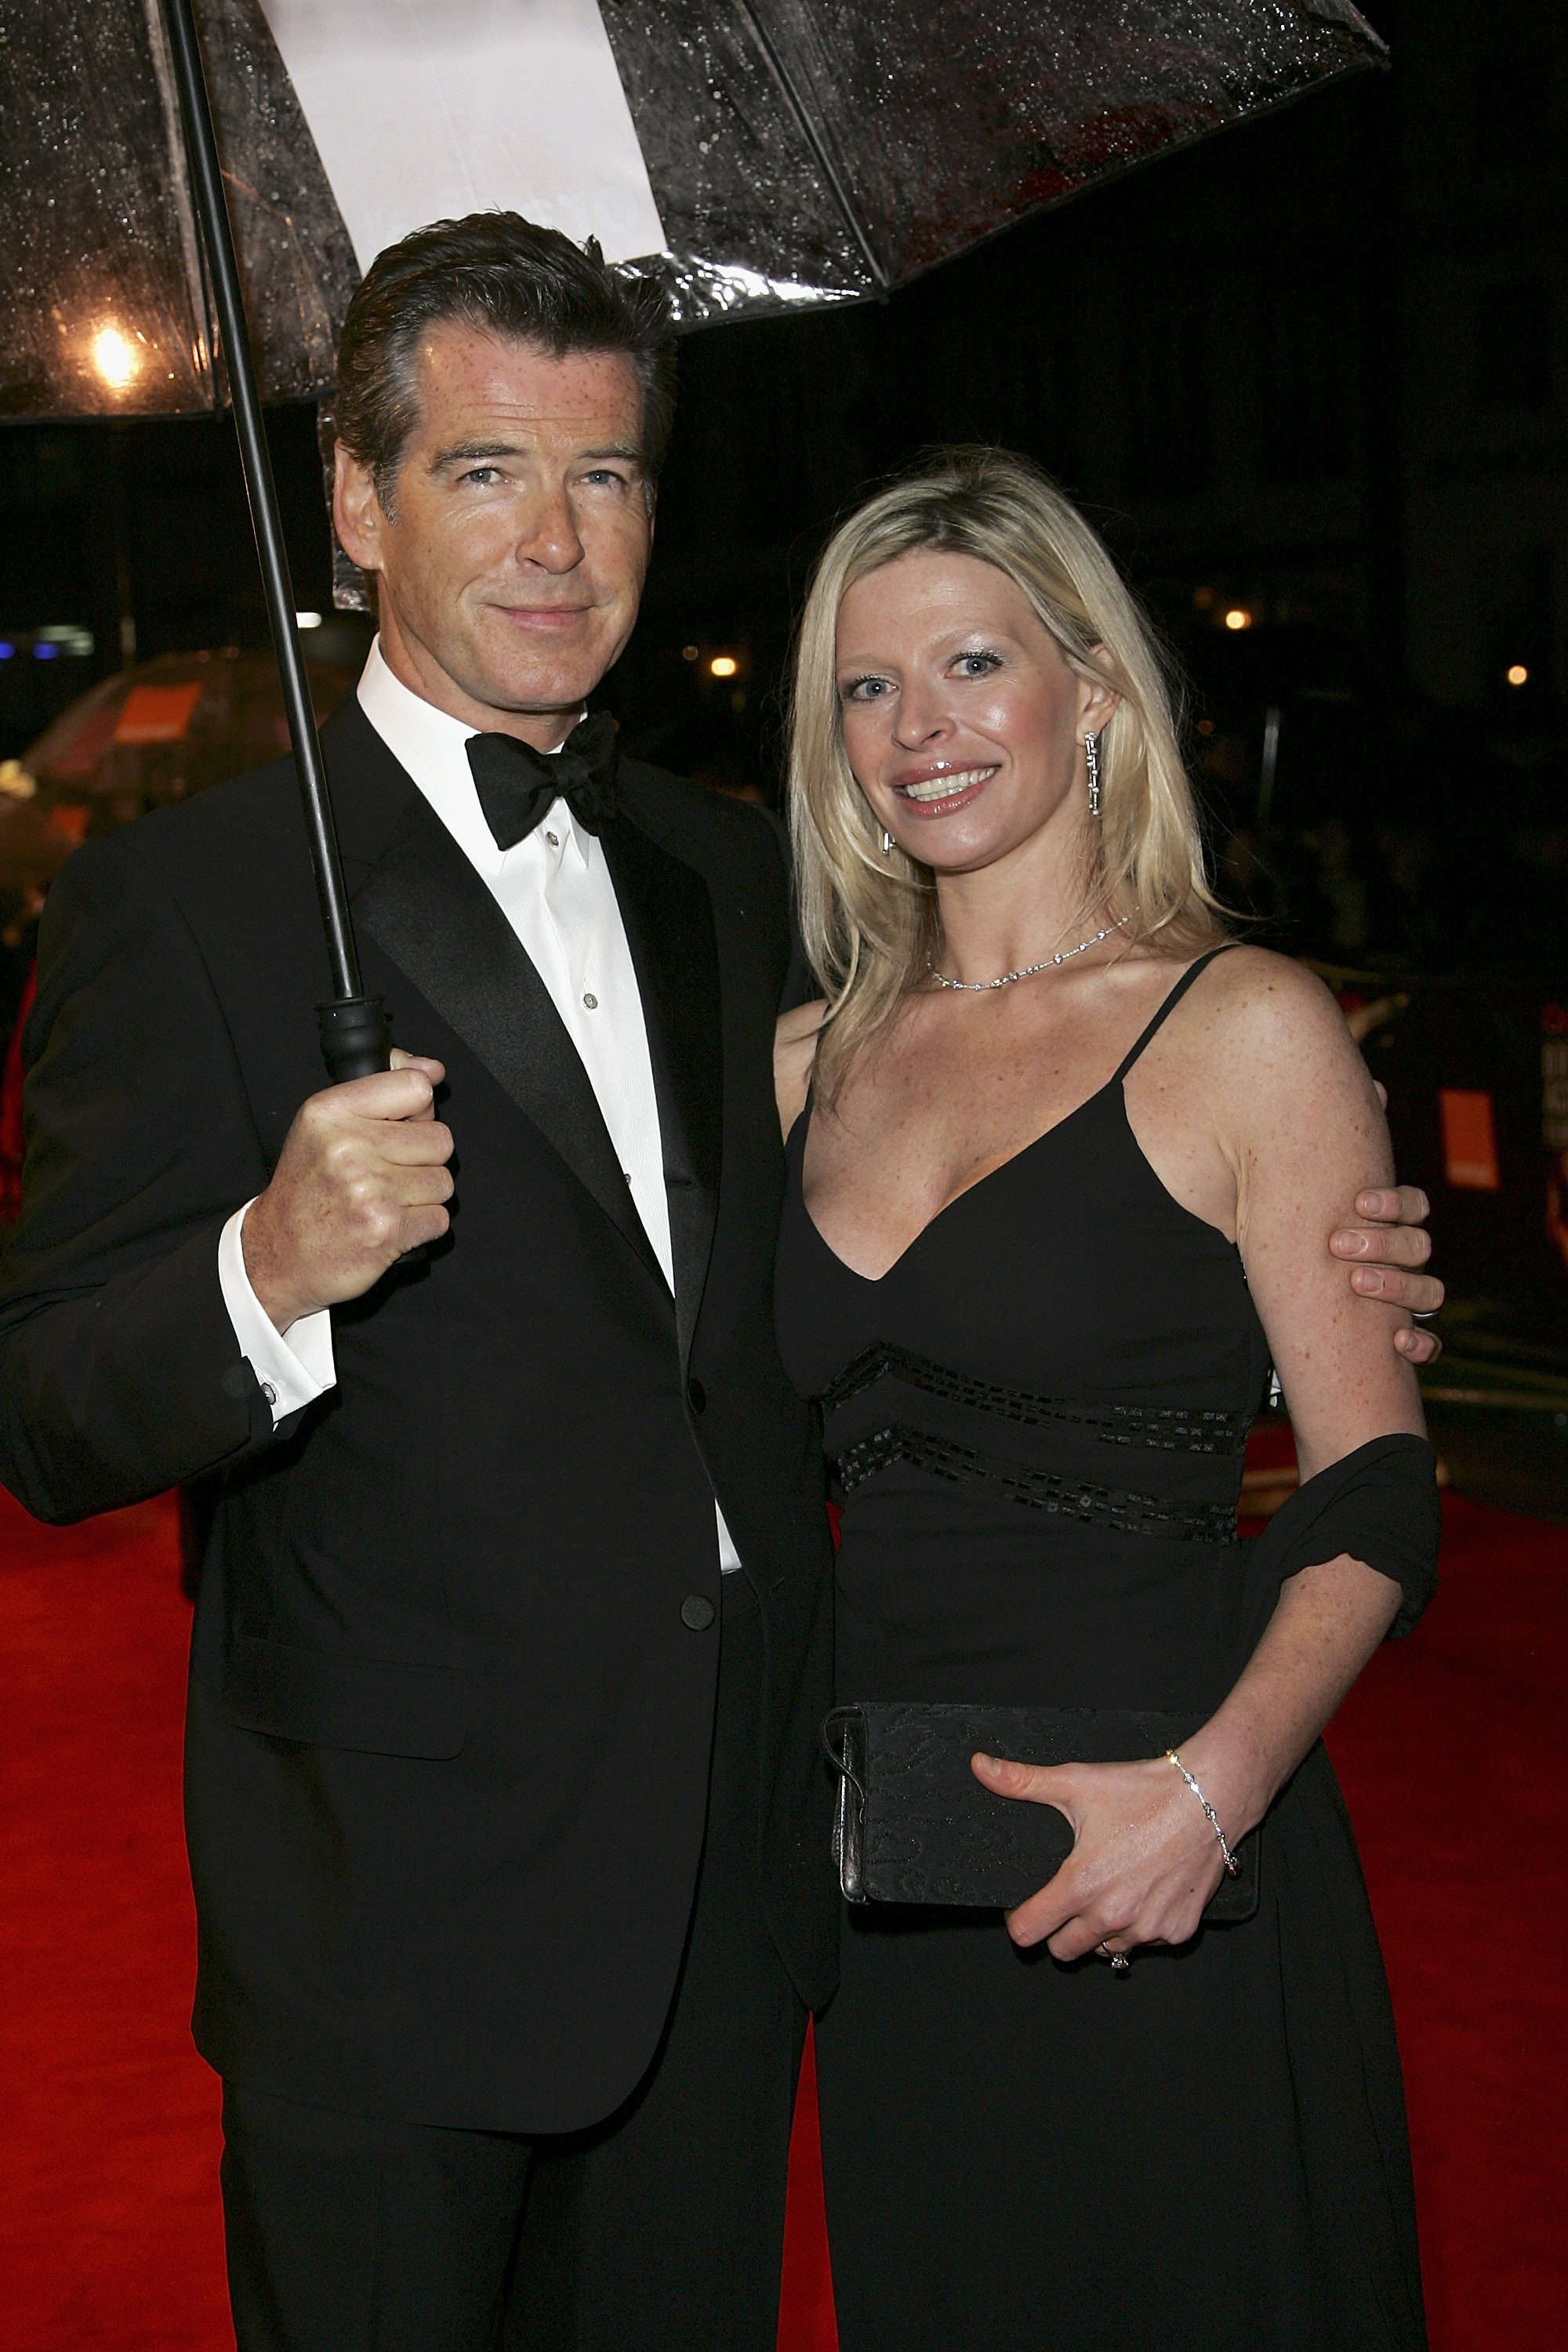 Pierce Brosnan and his late daughter Charlotte pictured together at the 2006 Baftas